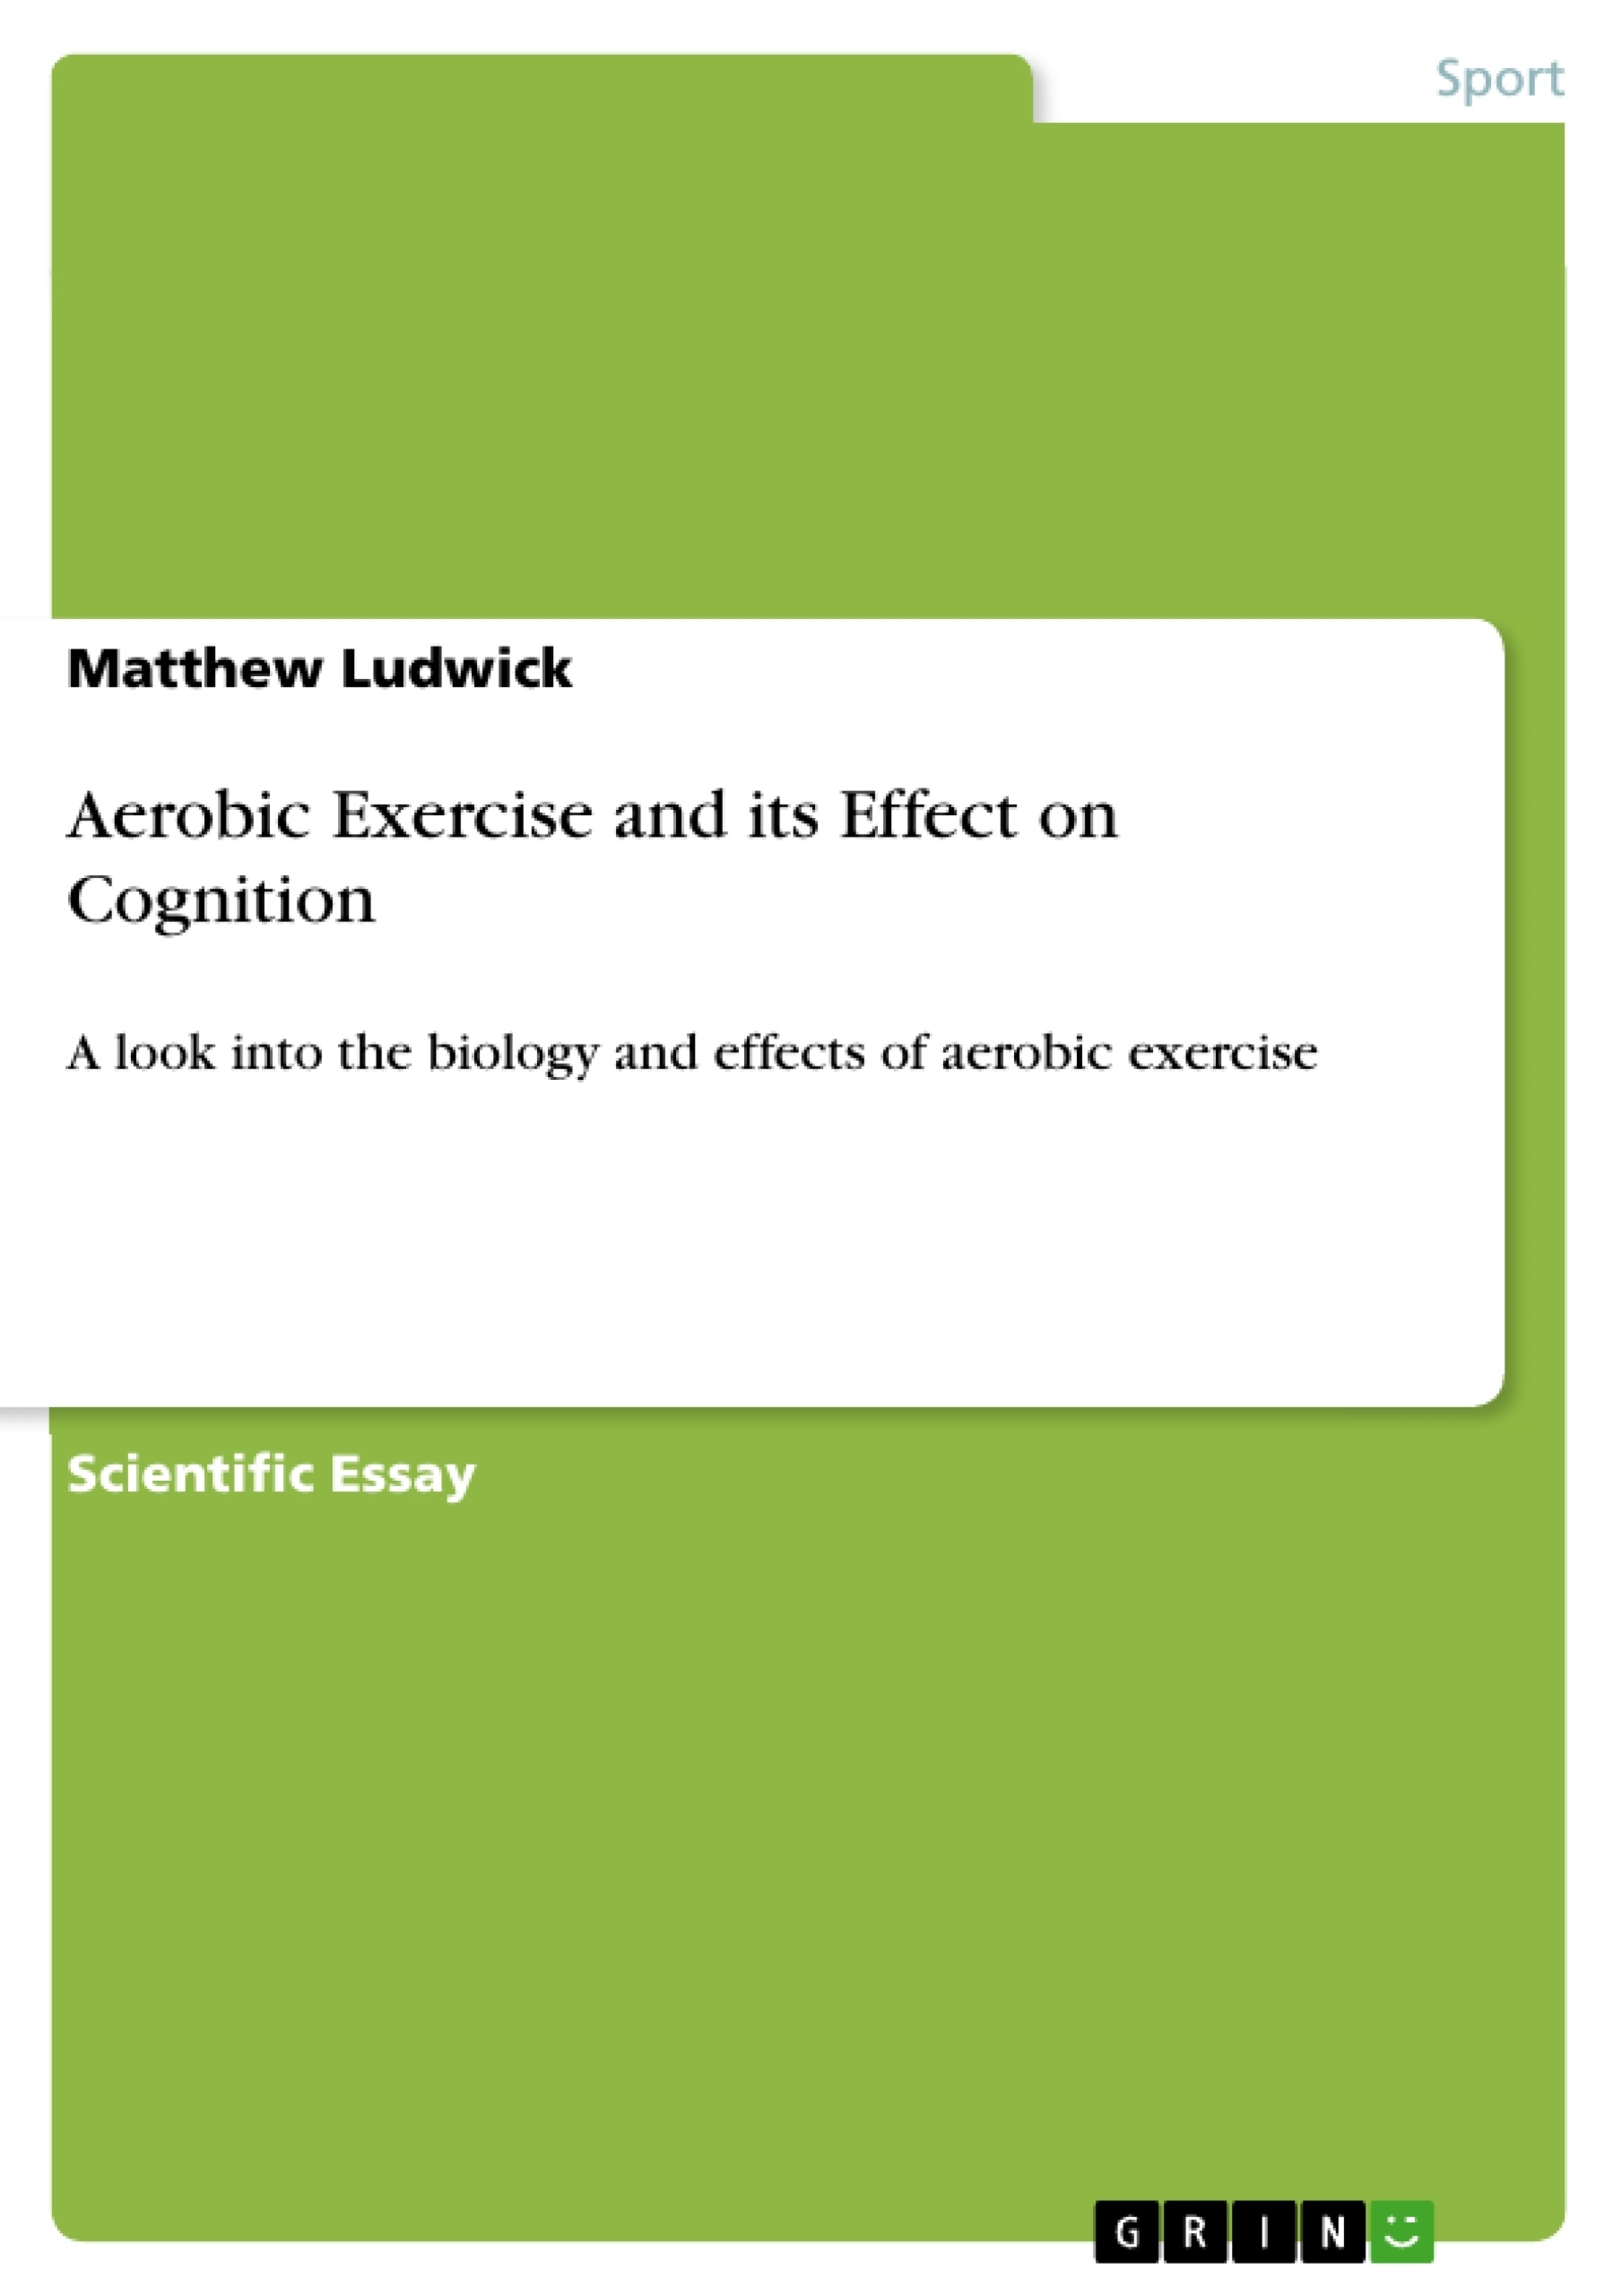 Title: Aerobic Exercise and its Effect on Cognition